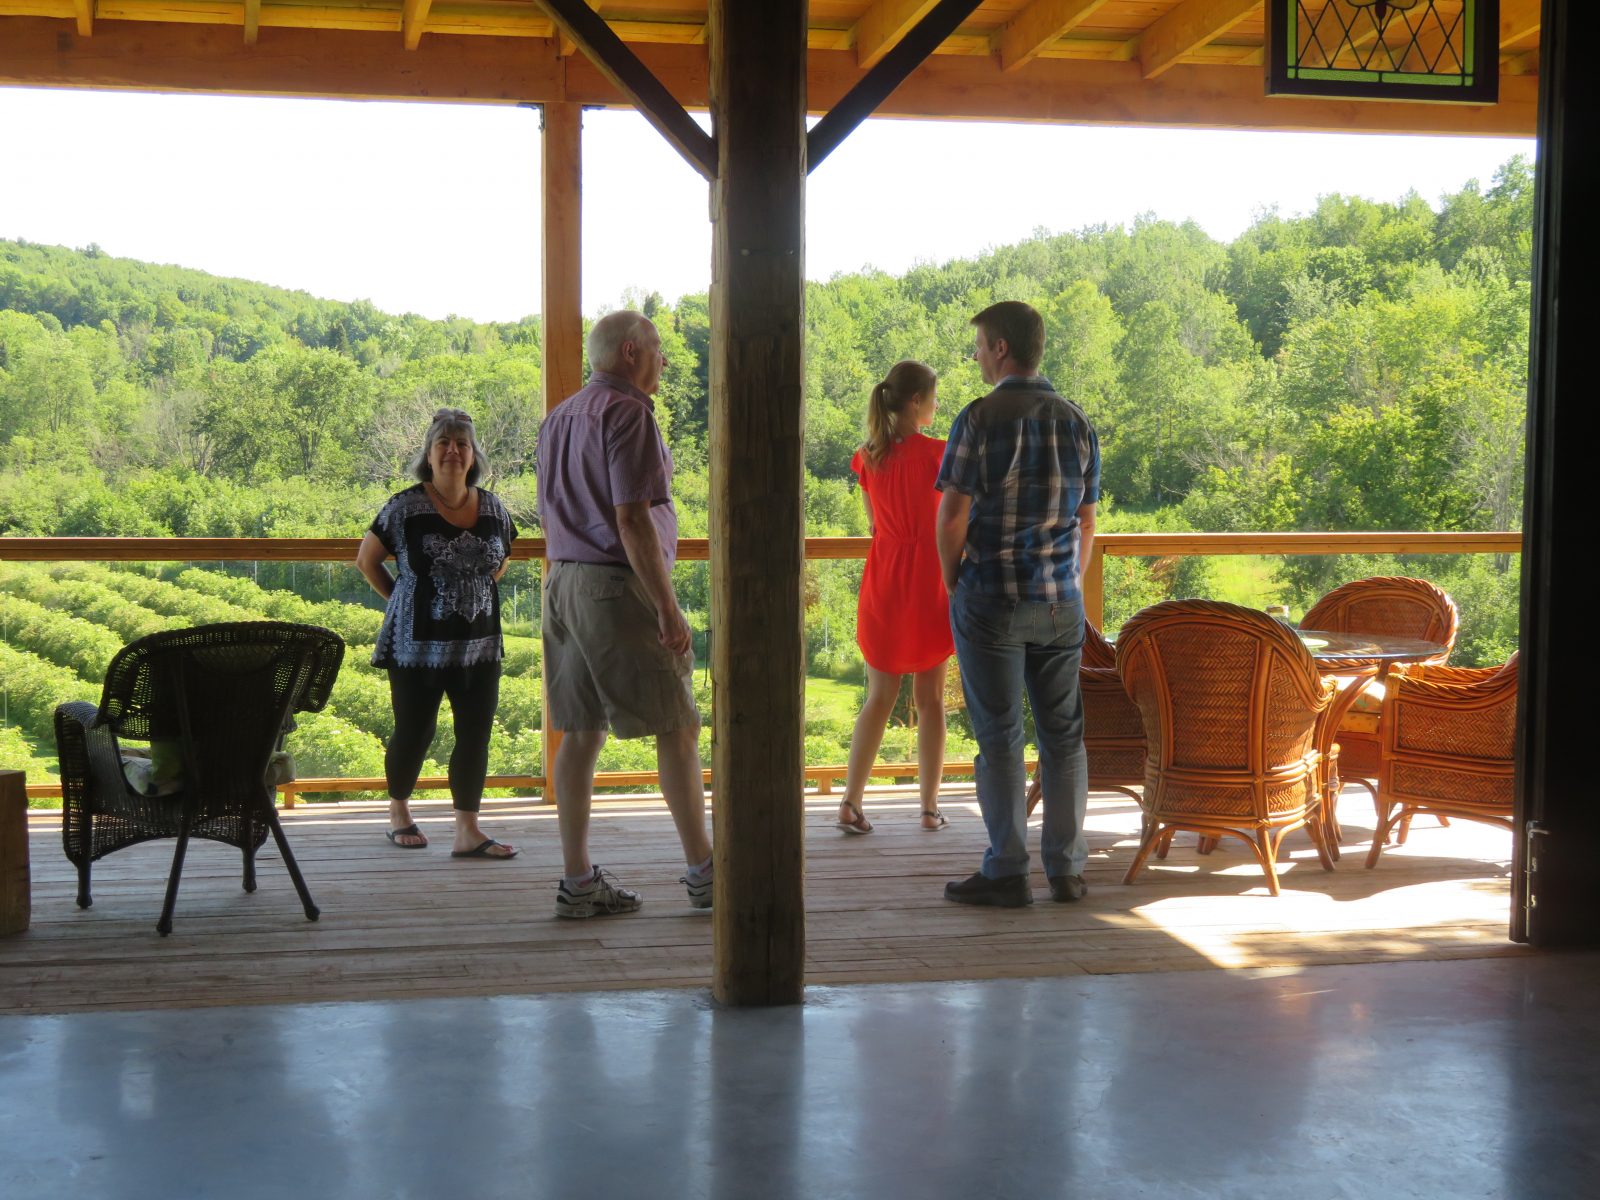 West Brome barn transports visitors to life on a plantation